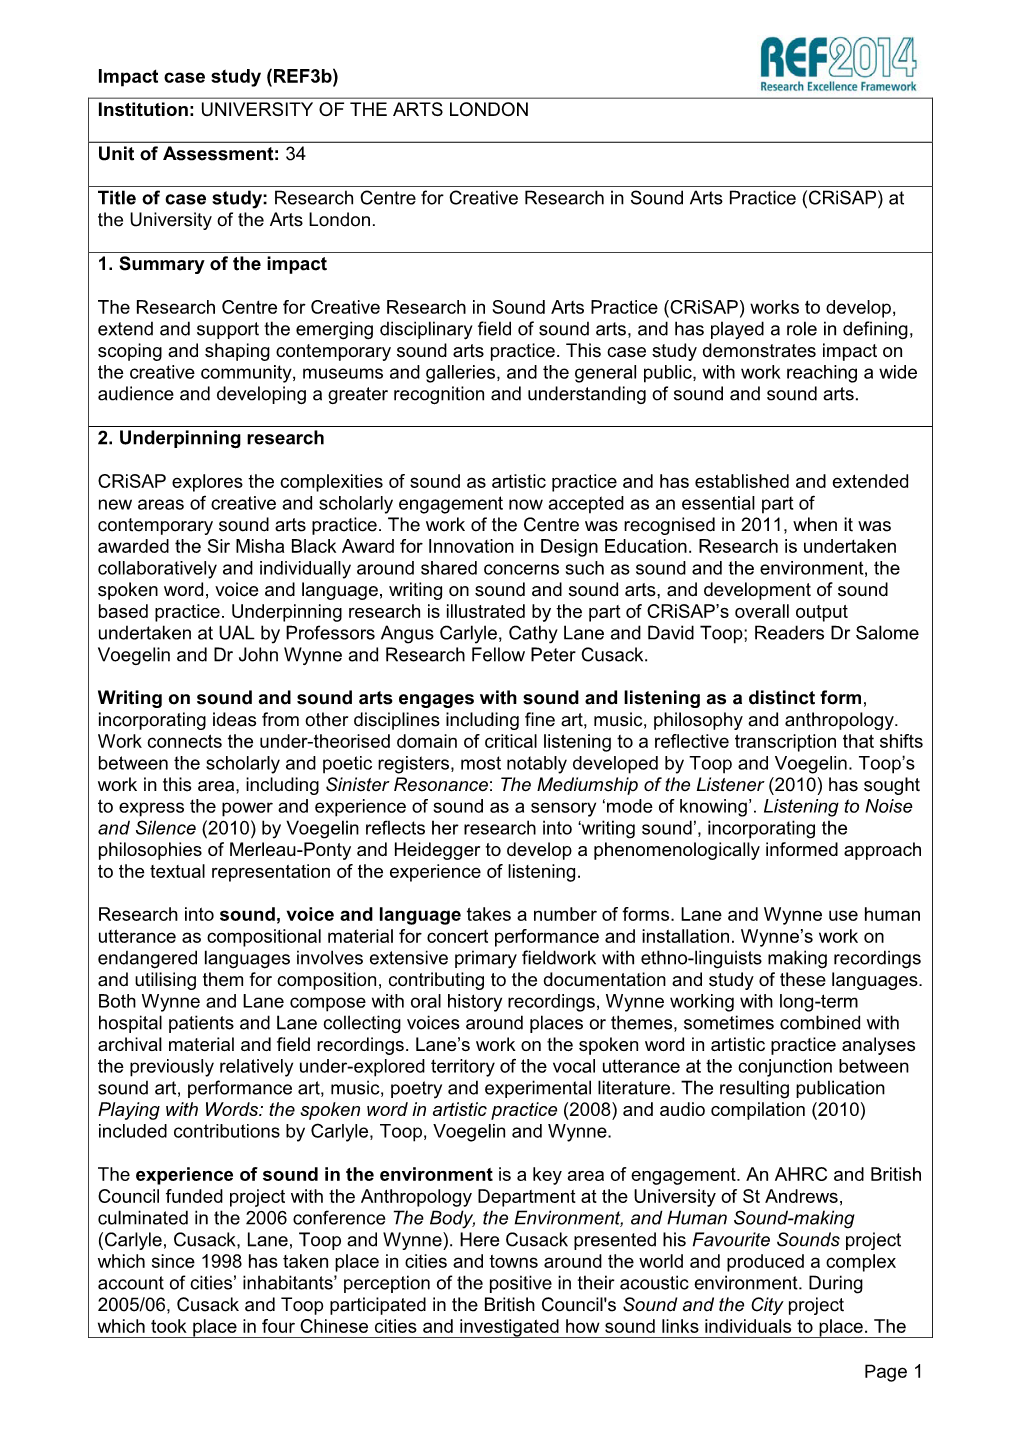 Impact Case Study (Ref3b) Page 1 Institution: UNIVERSITY of THE